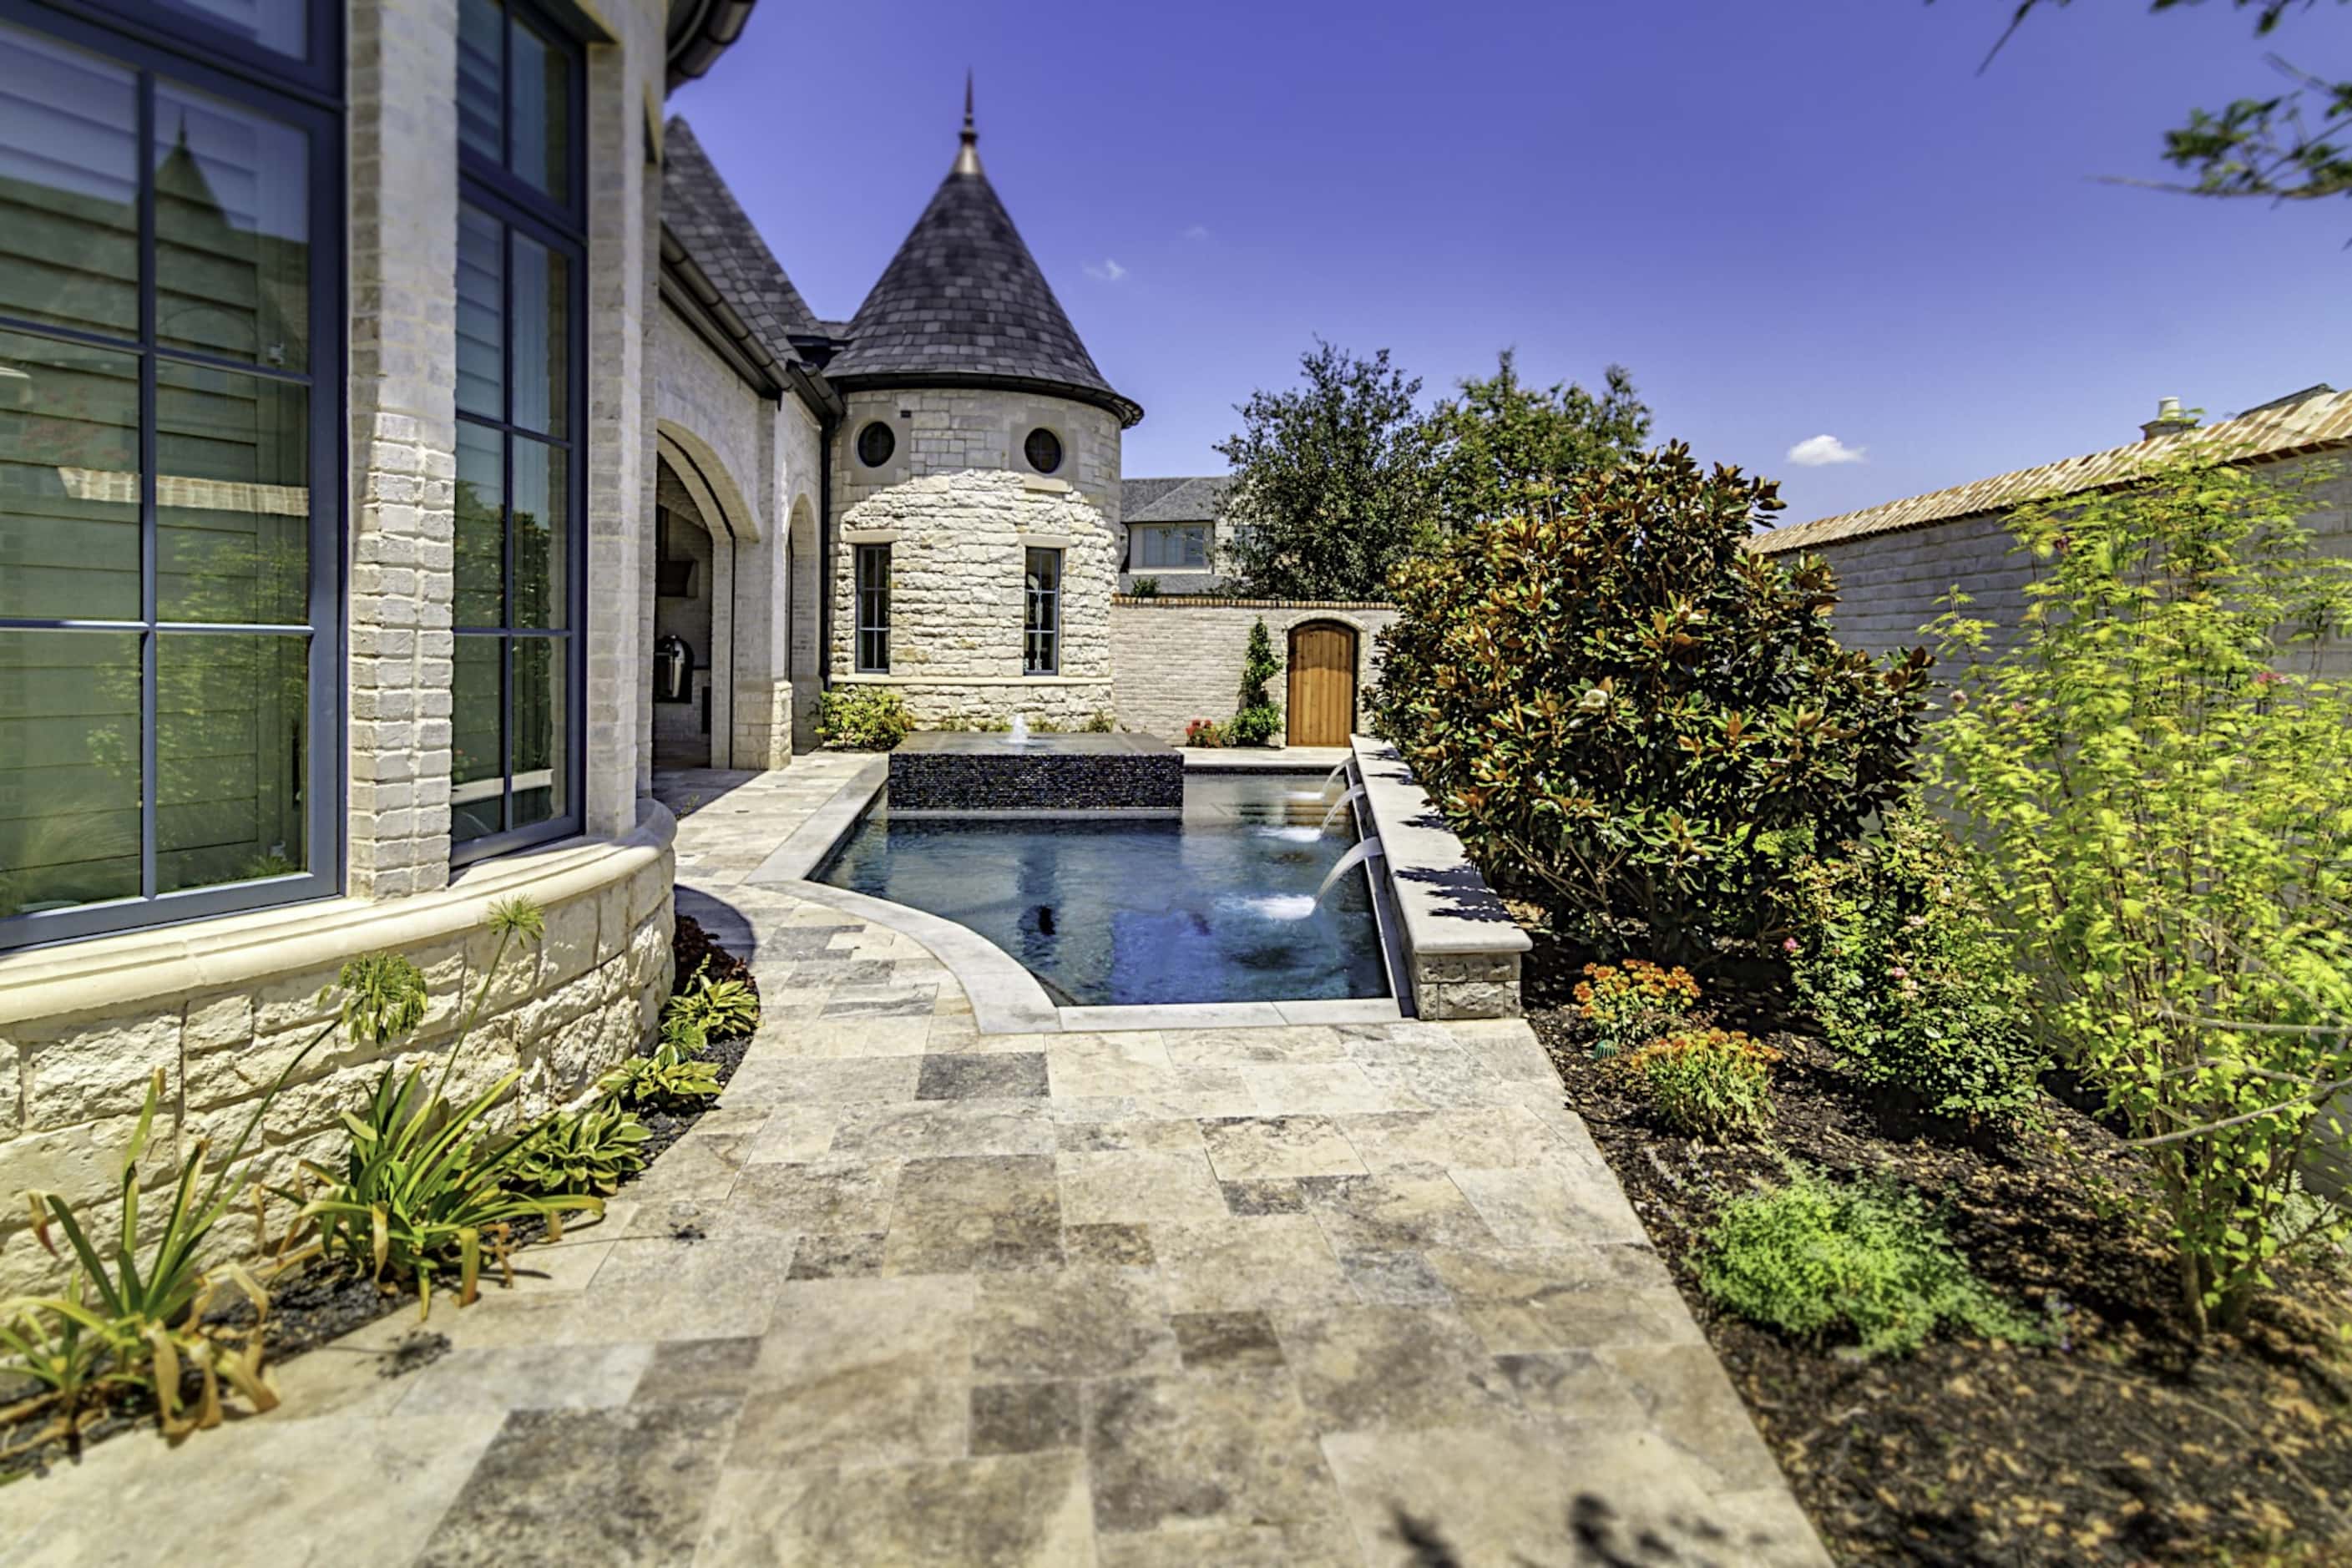 Plunge pools with fountains